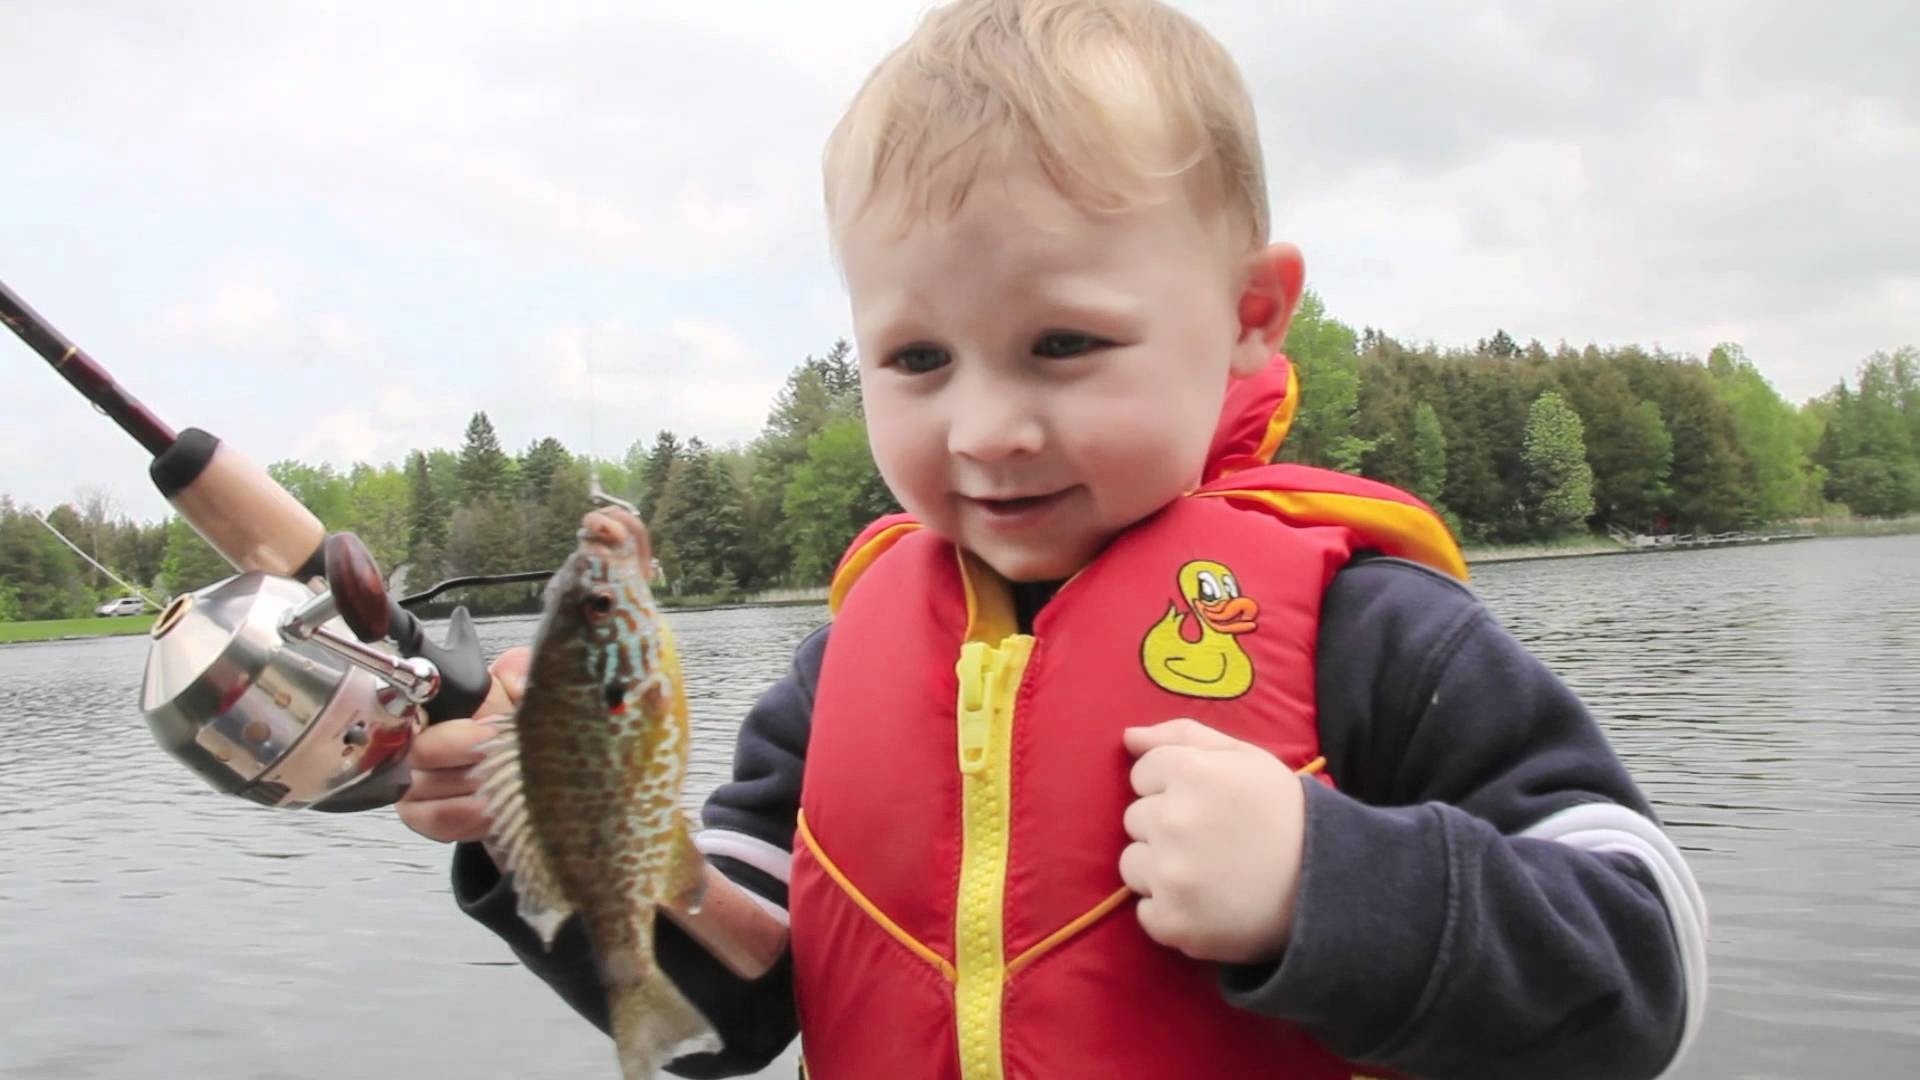 Boy’s Awesome Reaction to Catching His First Fish